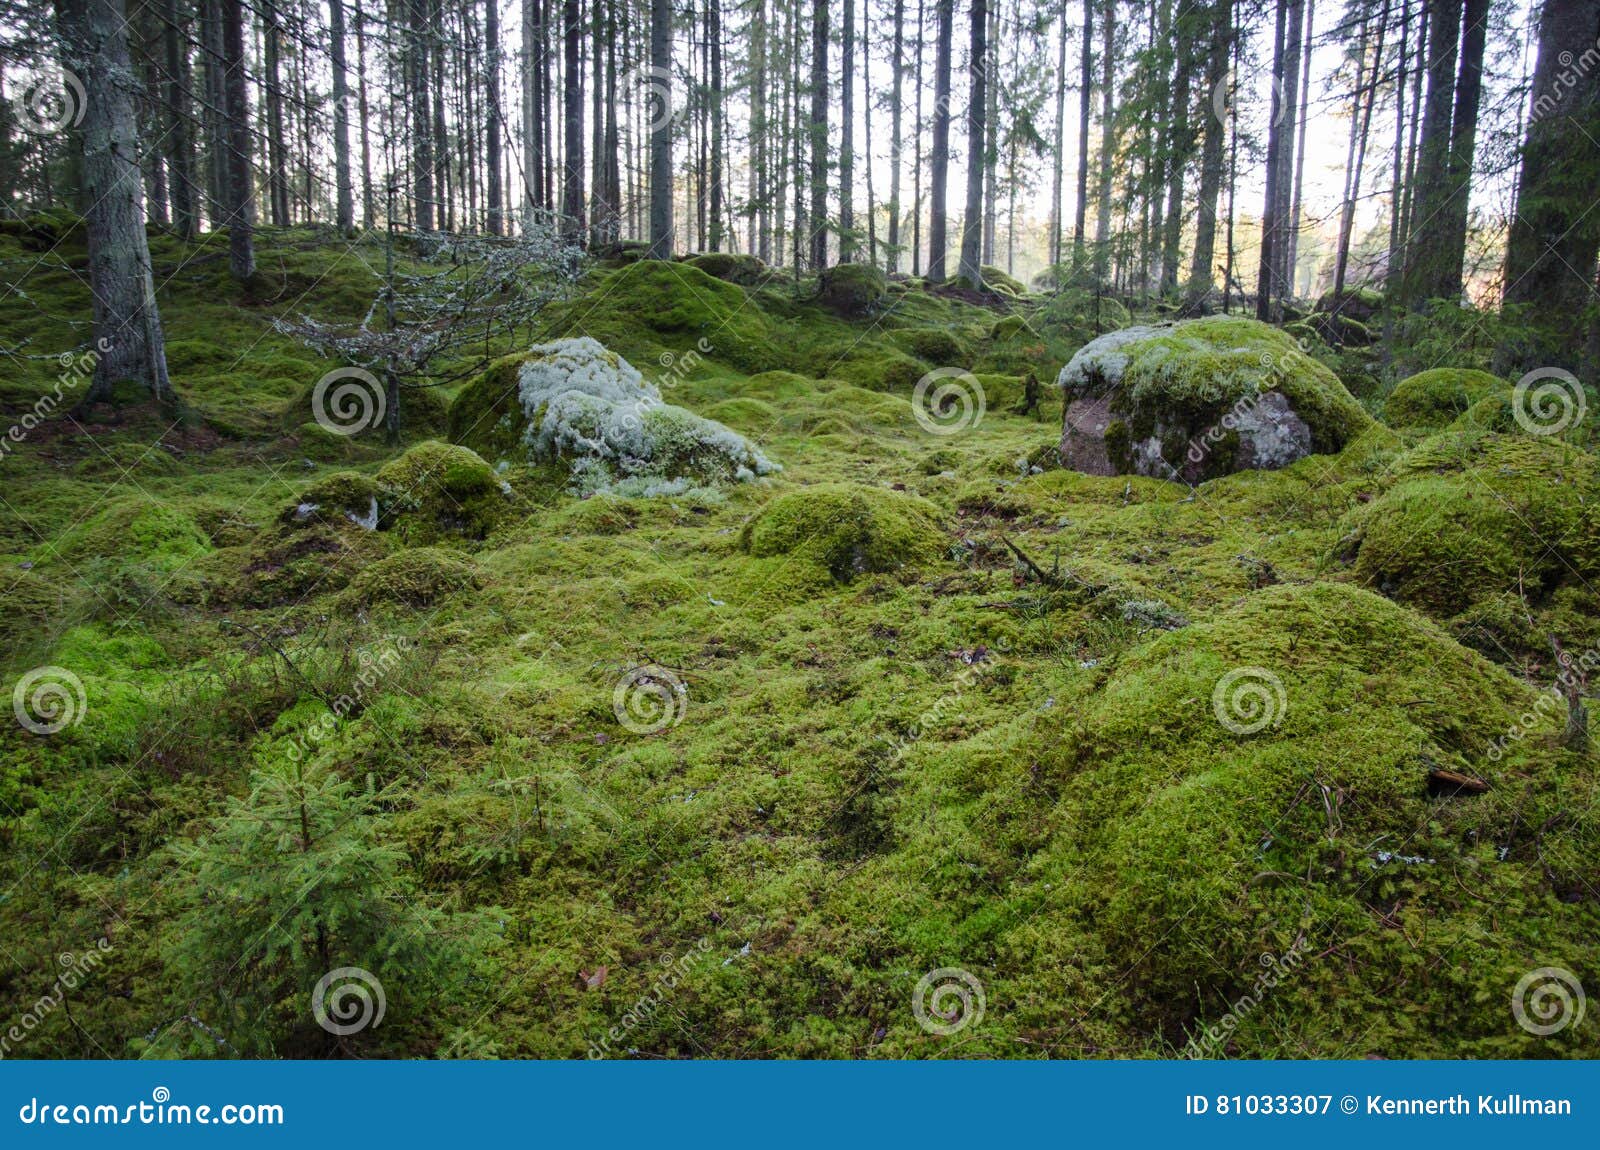 untouched and mossy forest ground